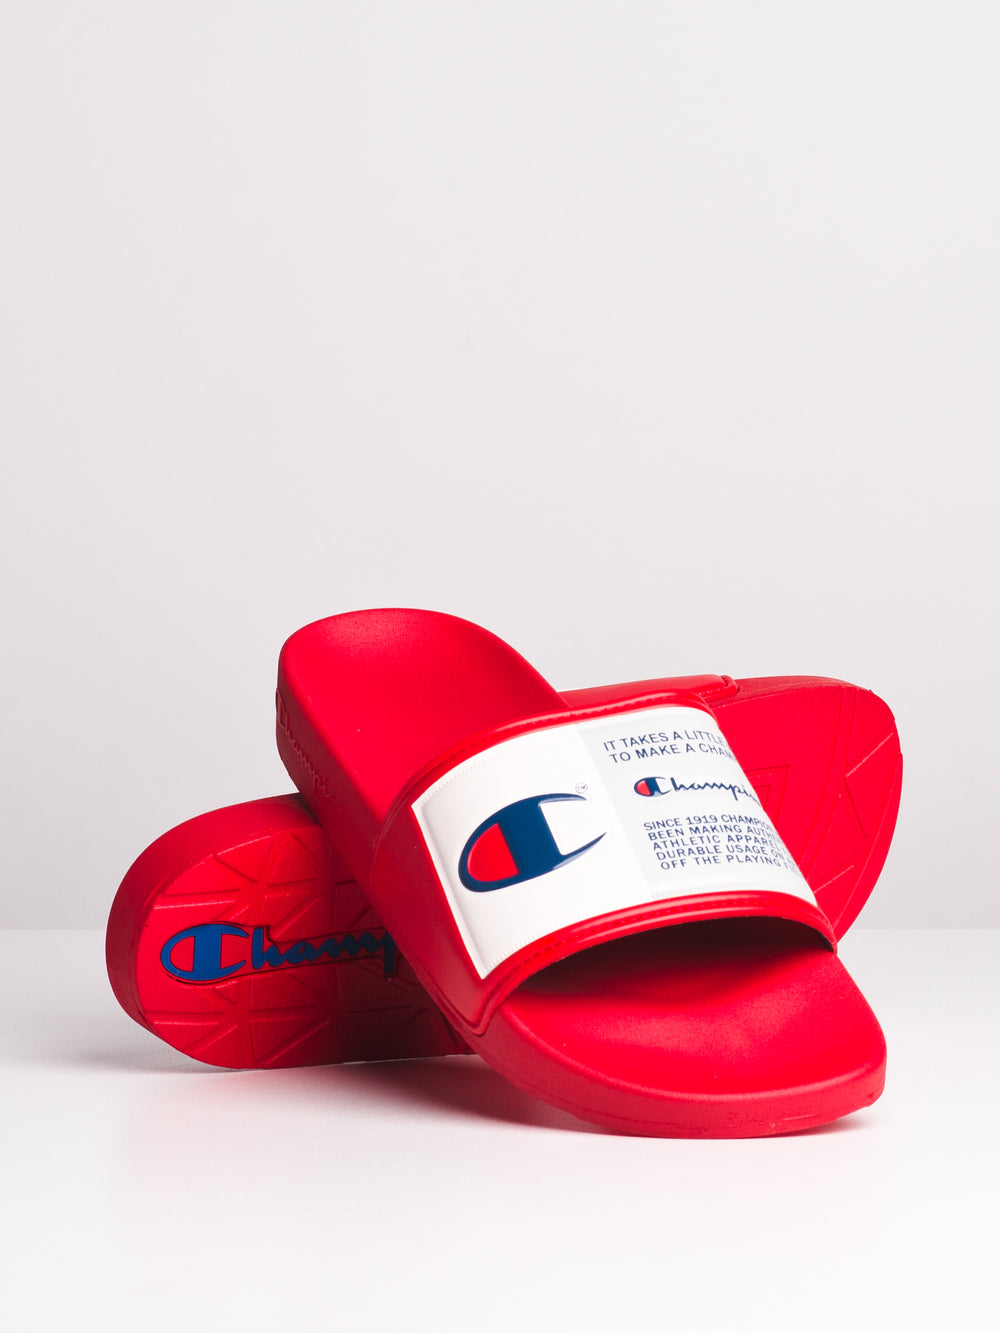 MENS IPO JOCK - RED SLIDES - CLEARANCE 